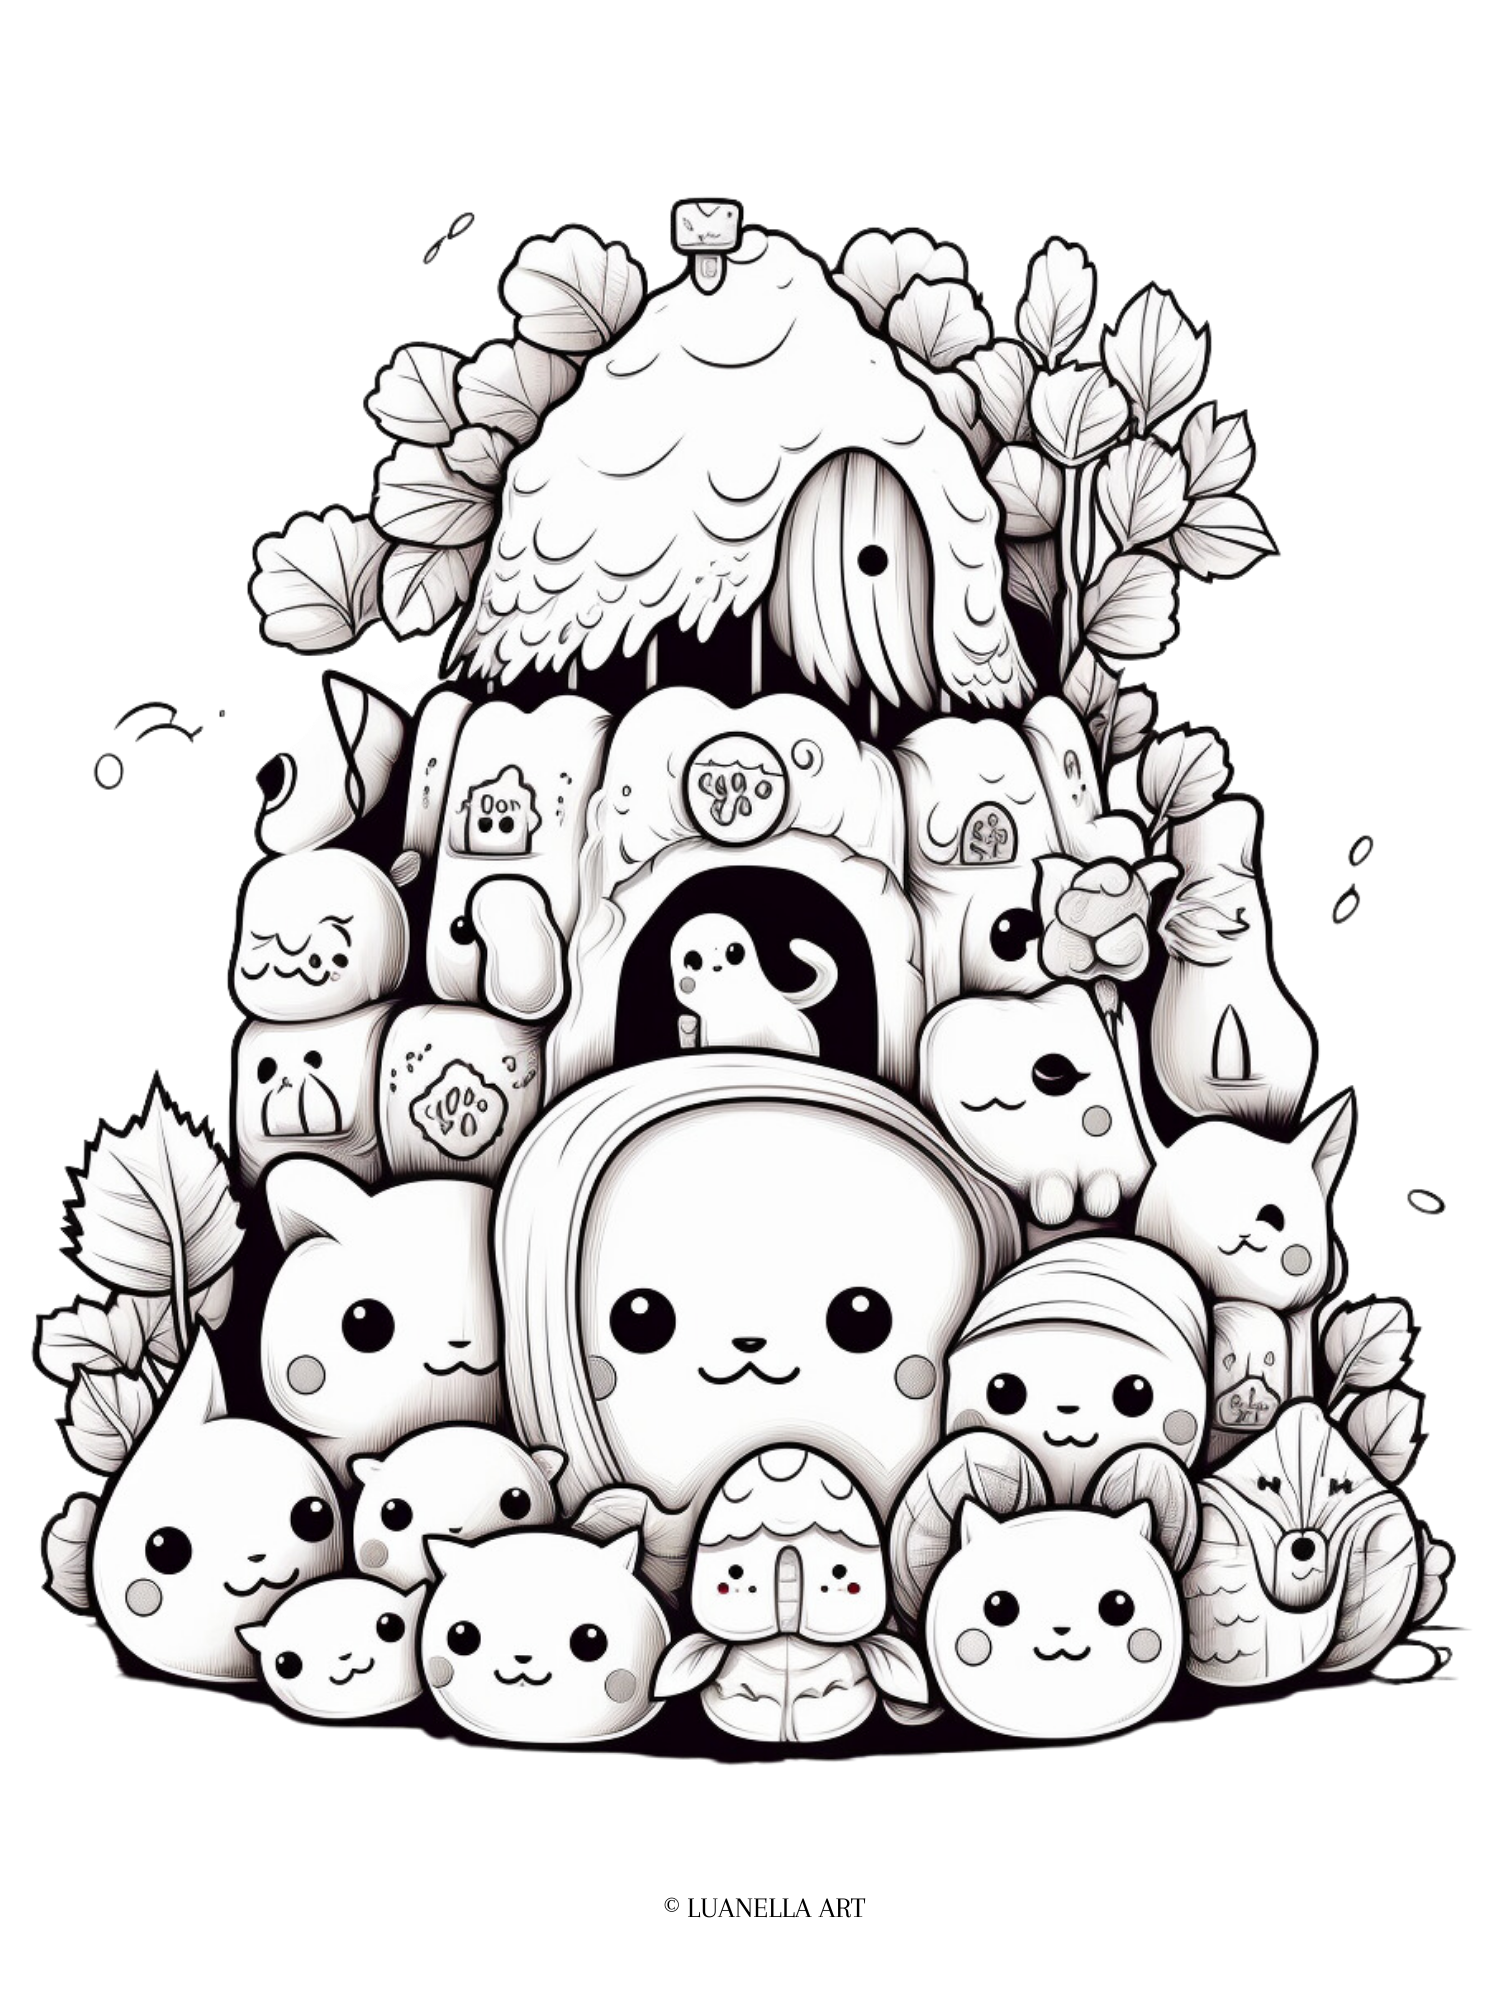 Squishmallow group coloring page instant digital download â luanella art